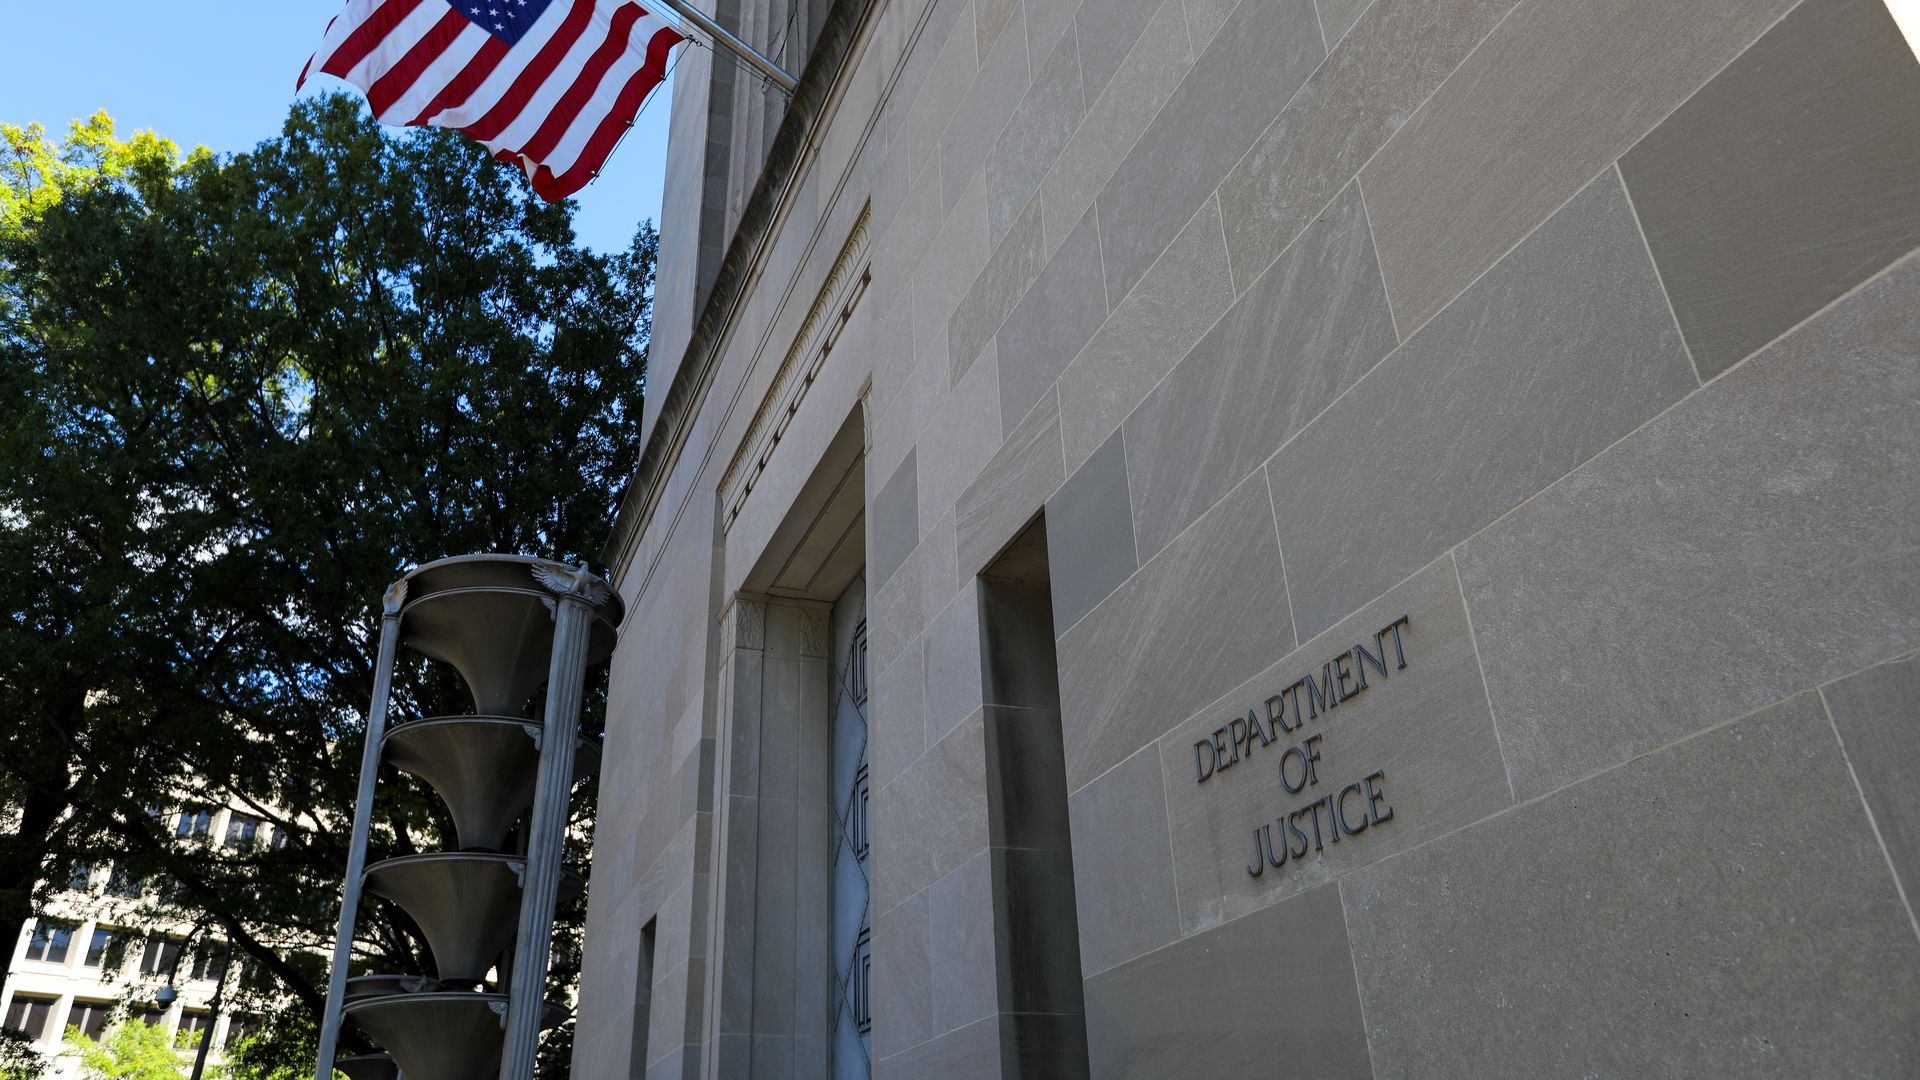 Photo of the front of the Justice Department building, with an American flag hanging off the side